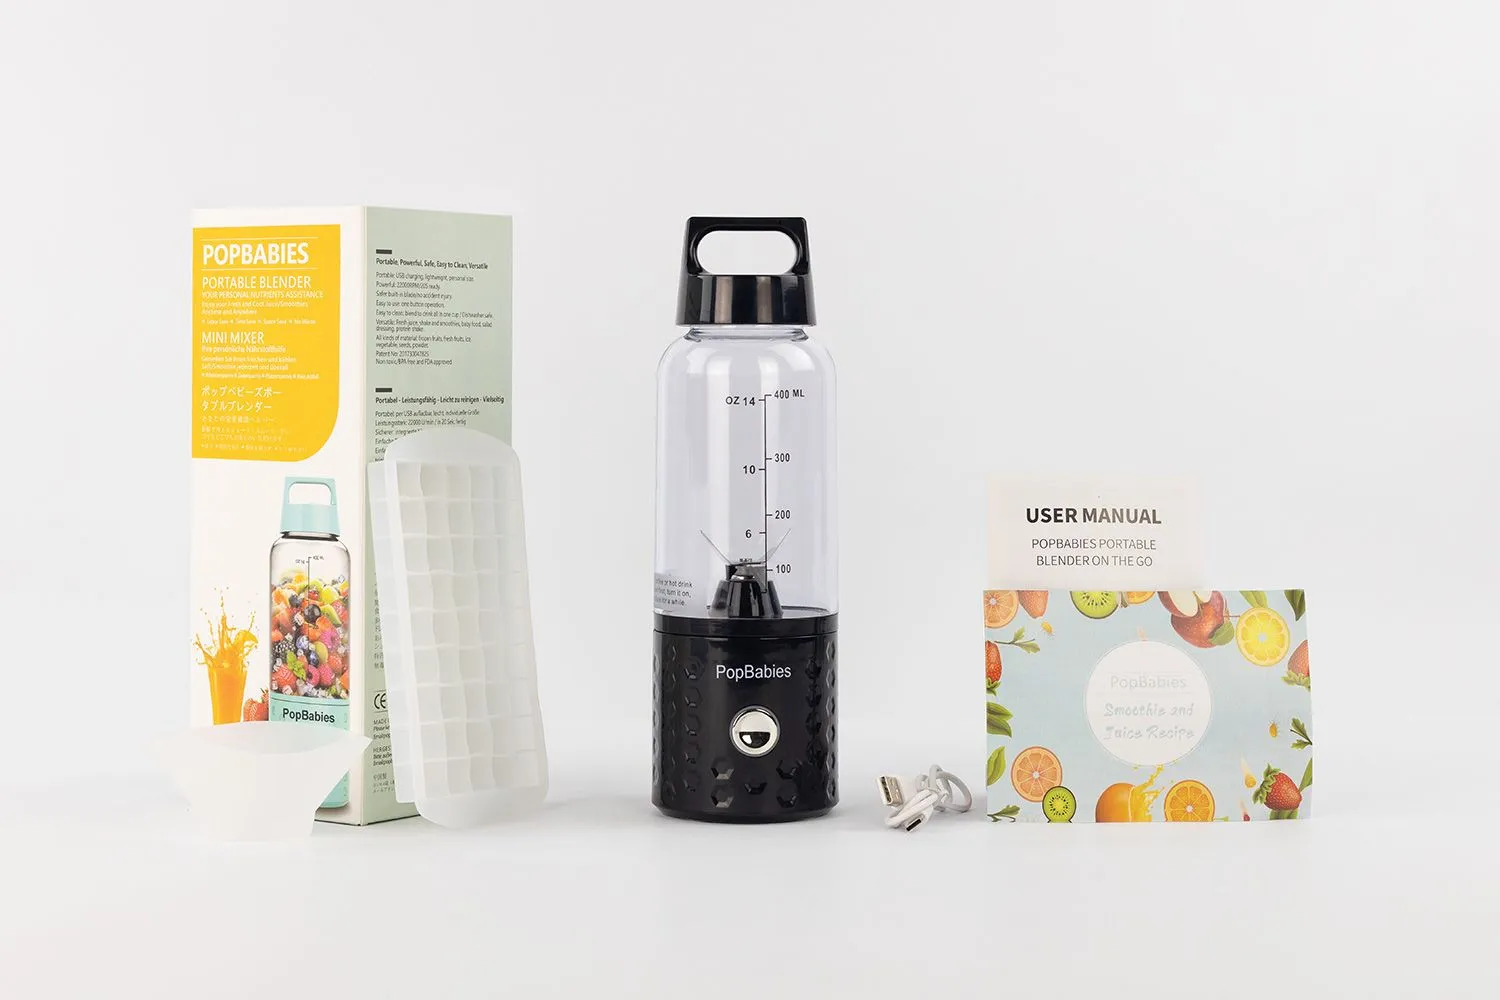 PopBabies portable blender review: It's lacking in battery life